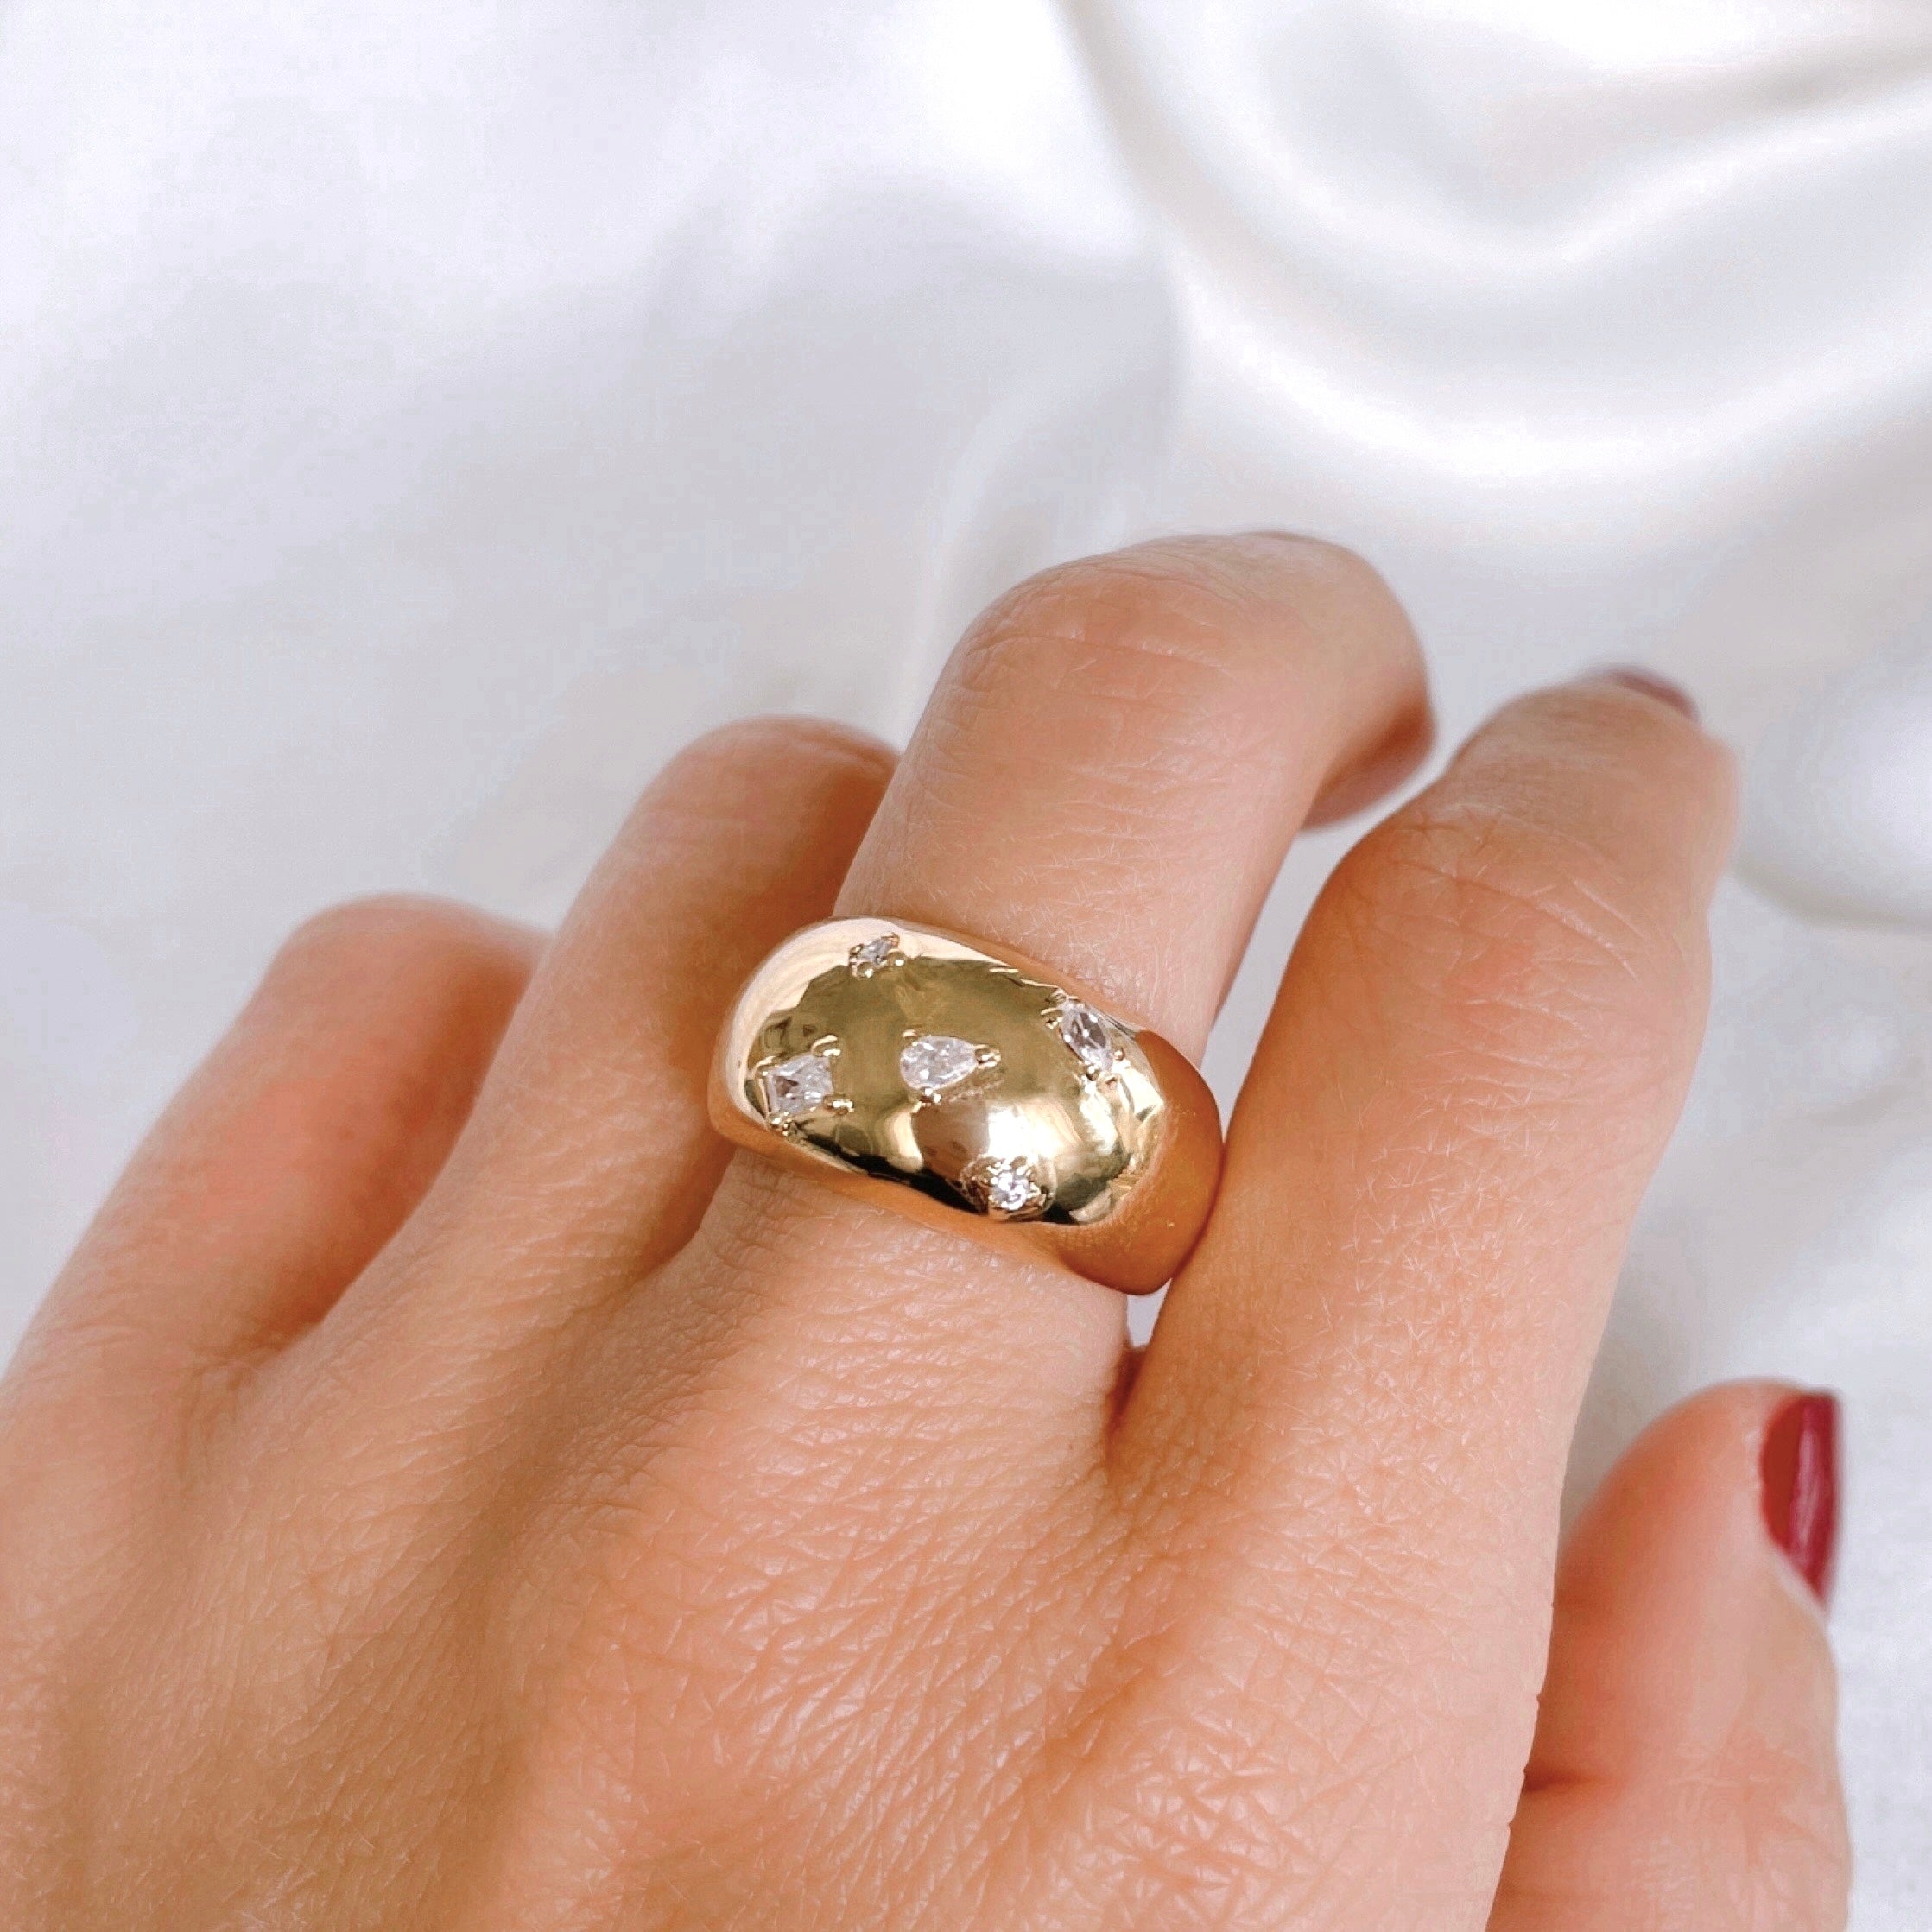 Gold-plated “Milky Way” ring